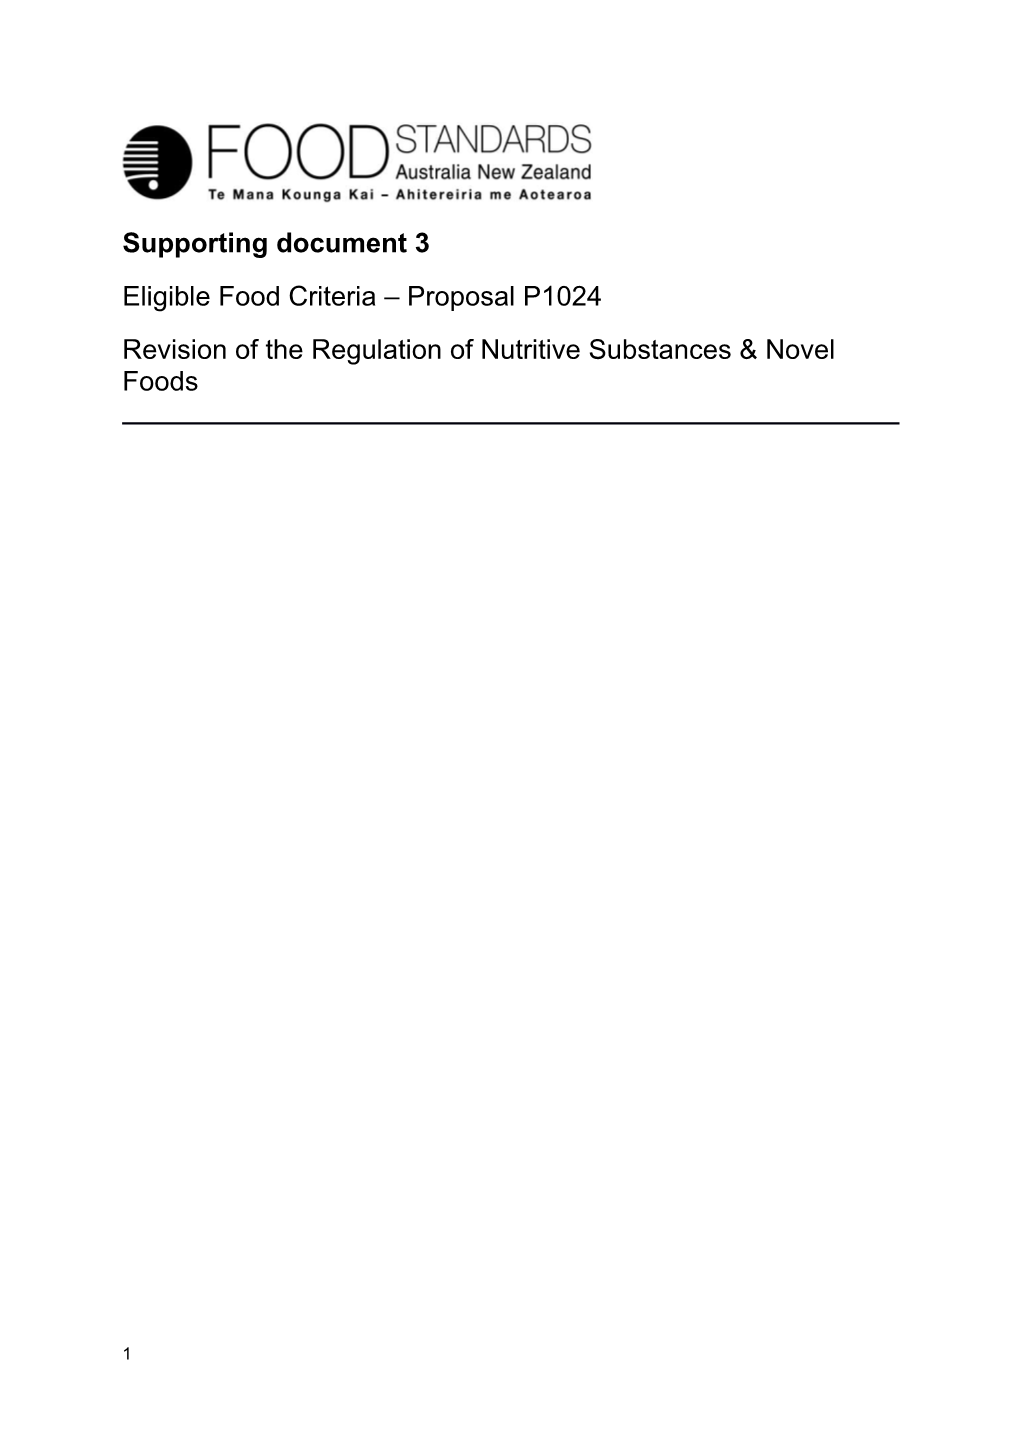 Supporting Document 3 - 1St CFS P1024